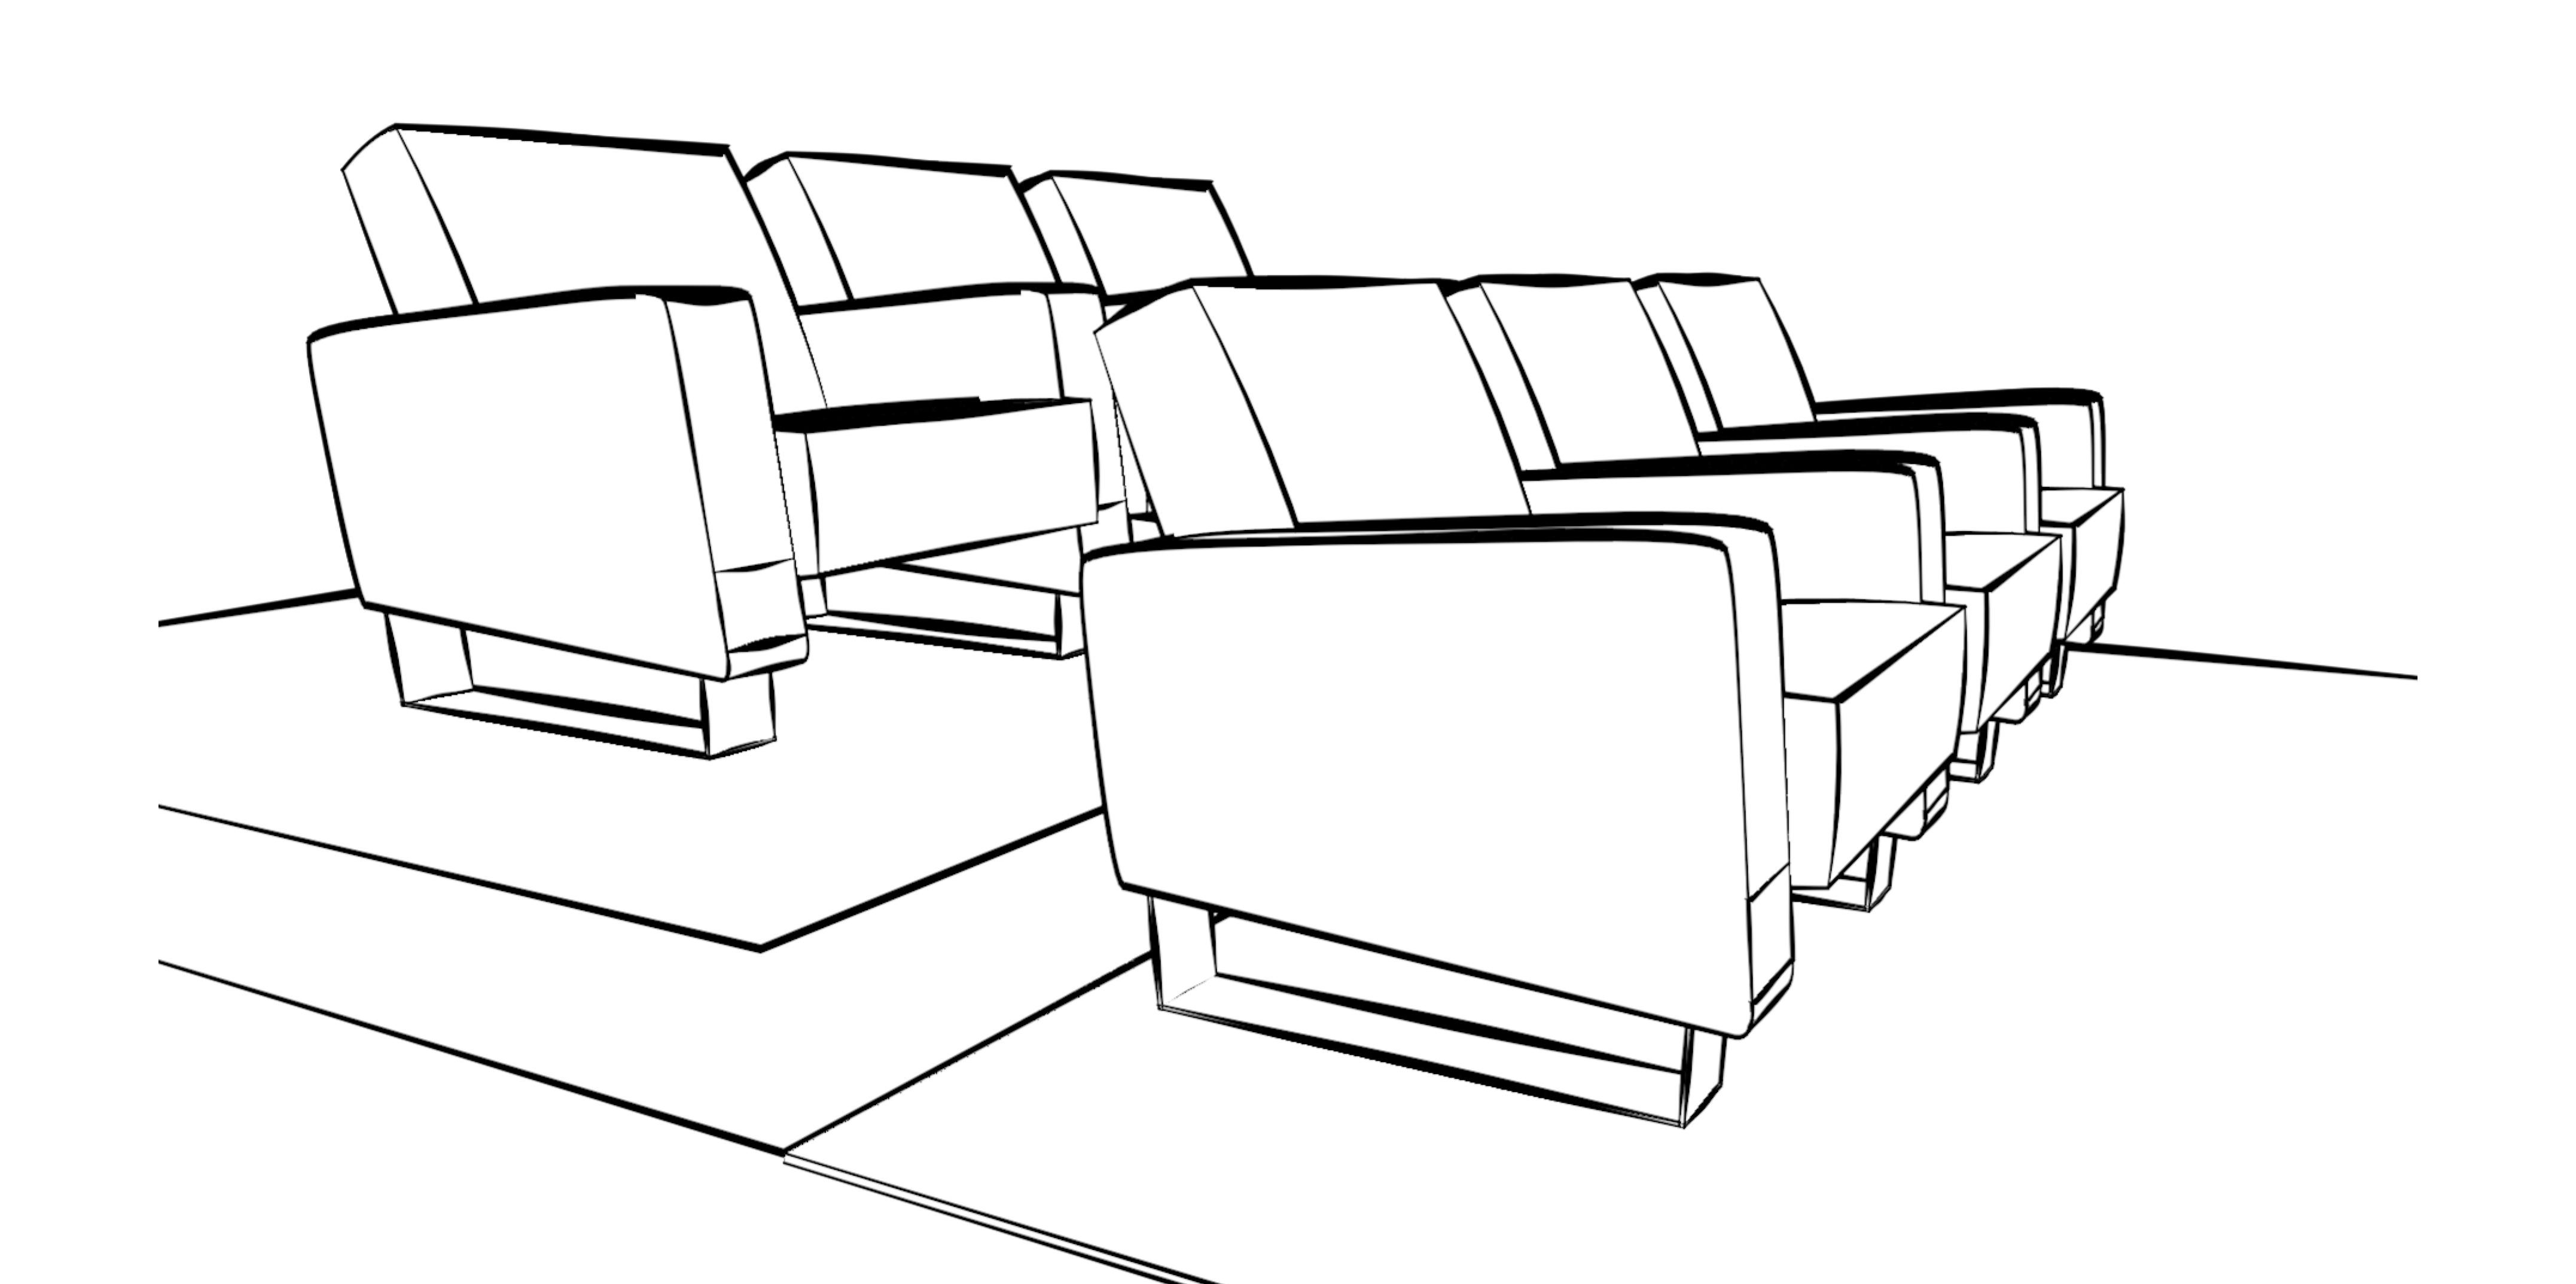 Hughes for Screening Rooms